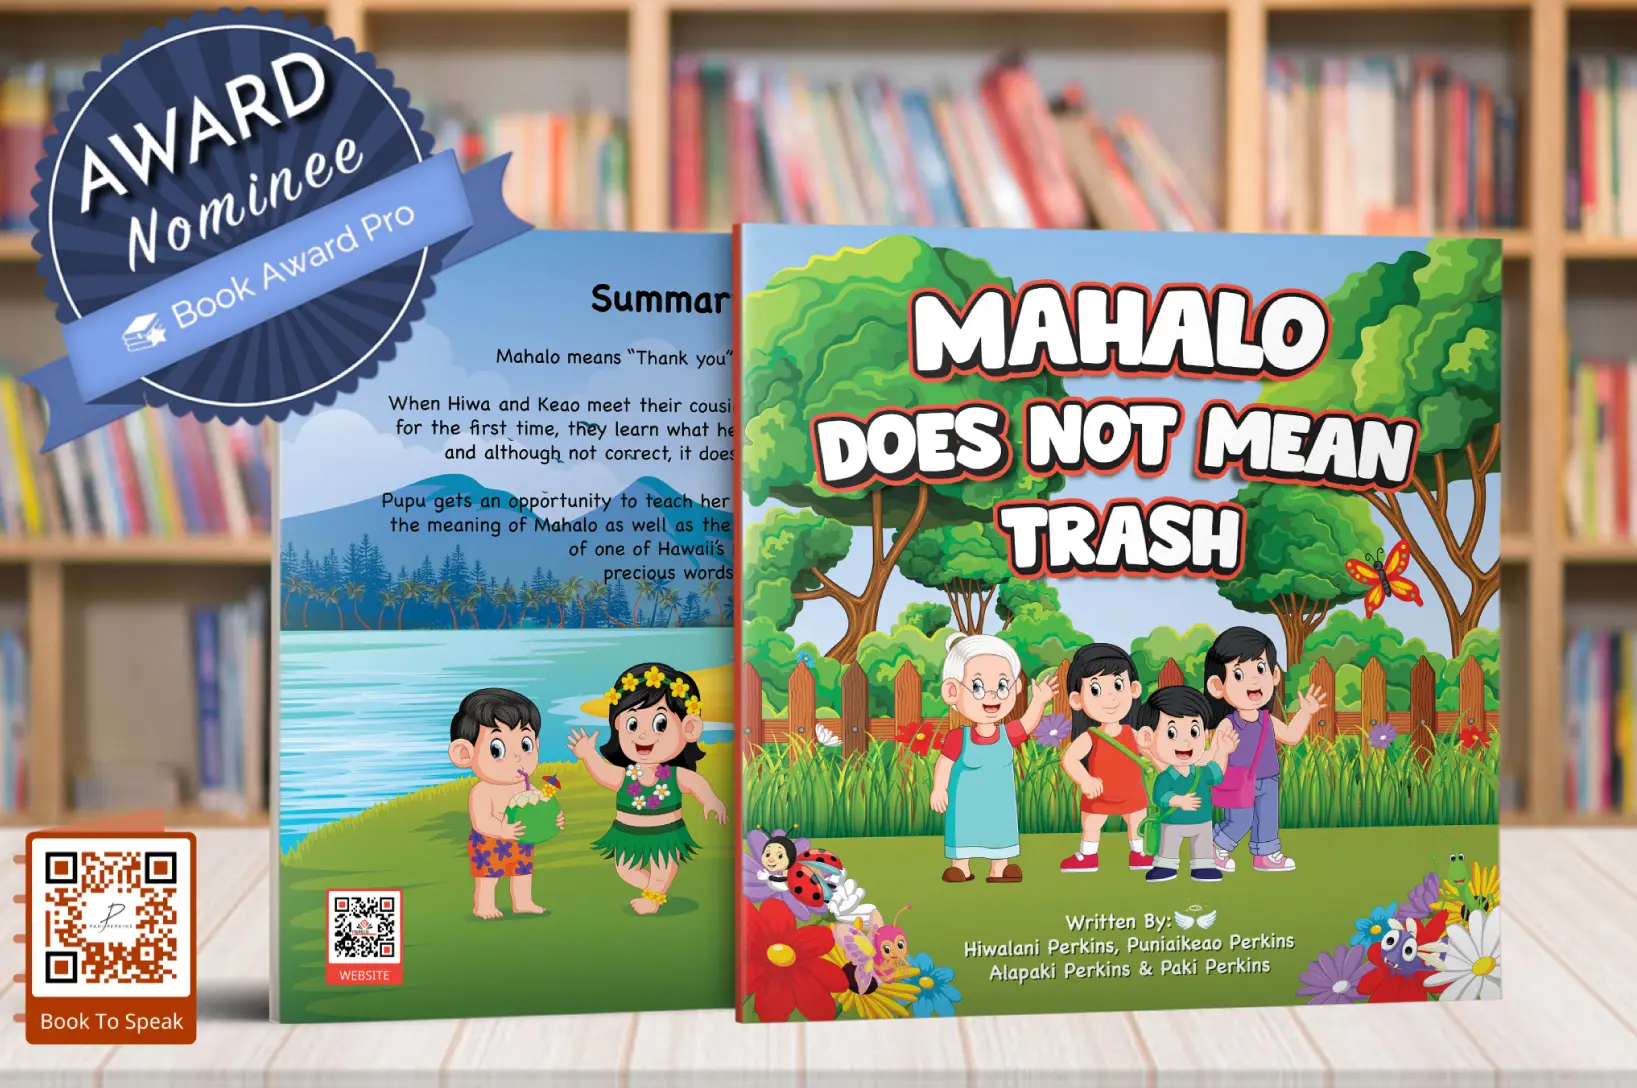 A colorful children's book called "Mahalo Does Not Mean Trash" with a QR Code call to action.